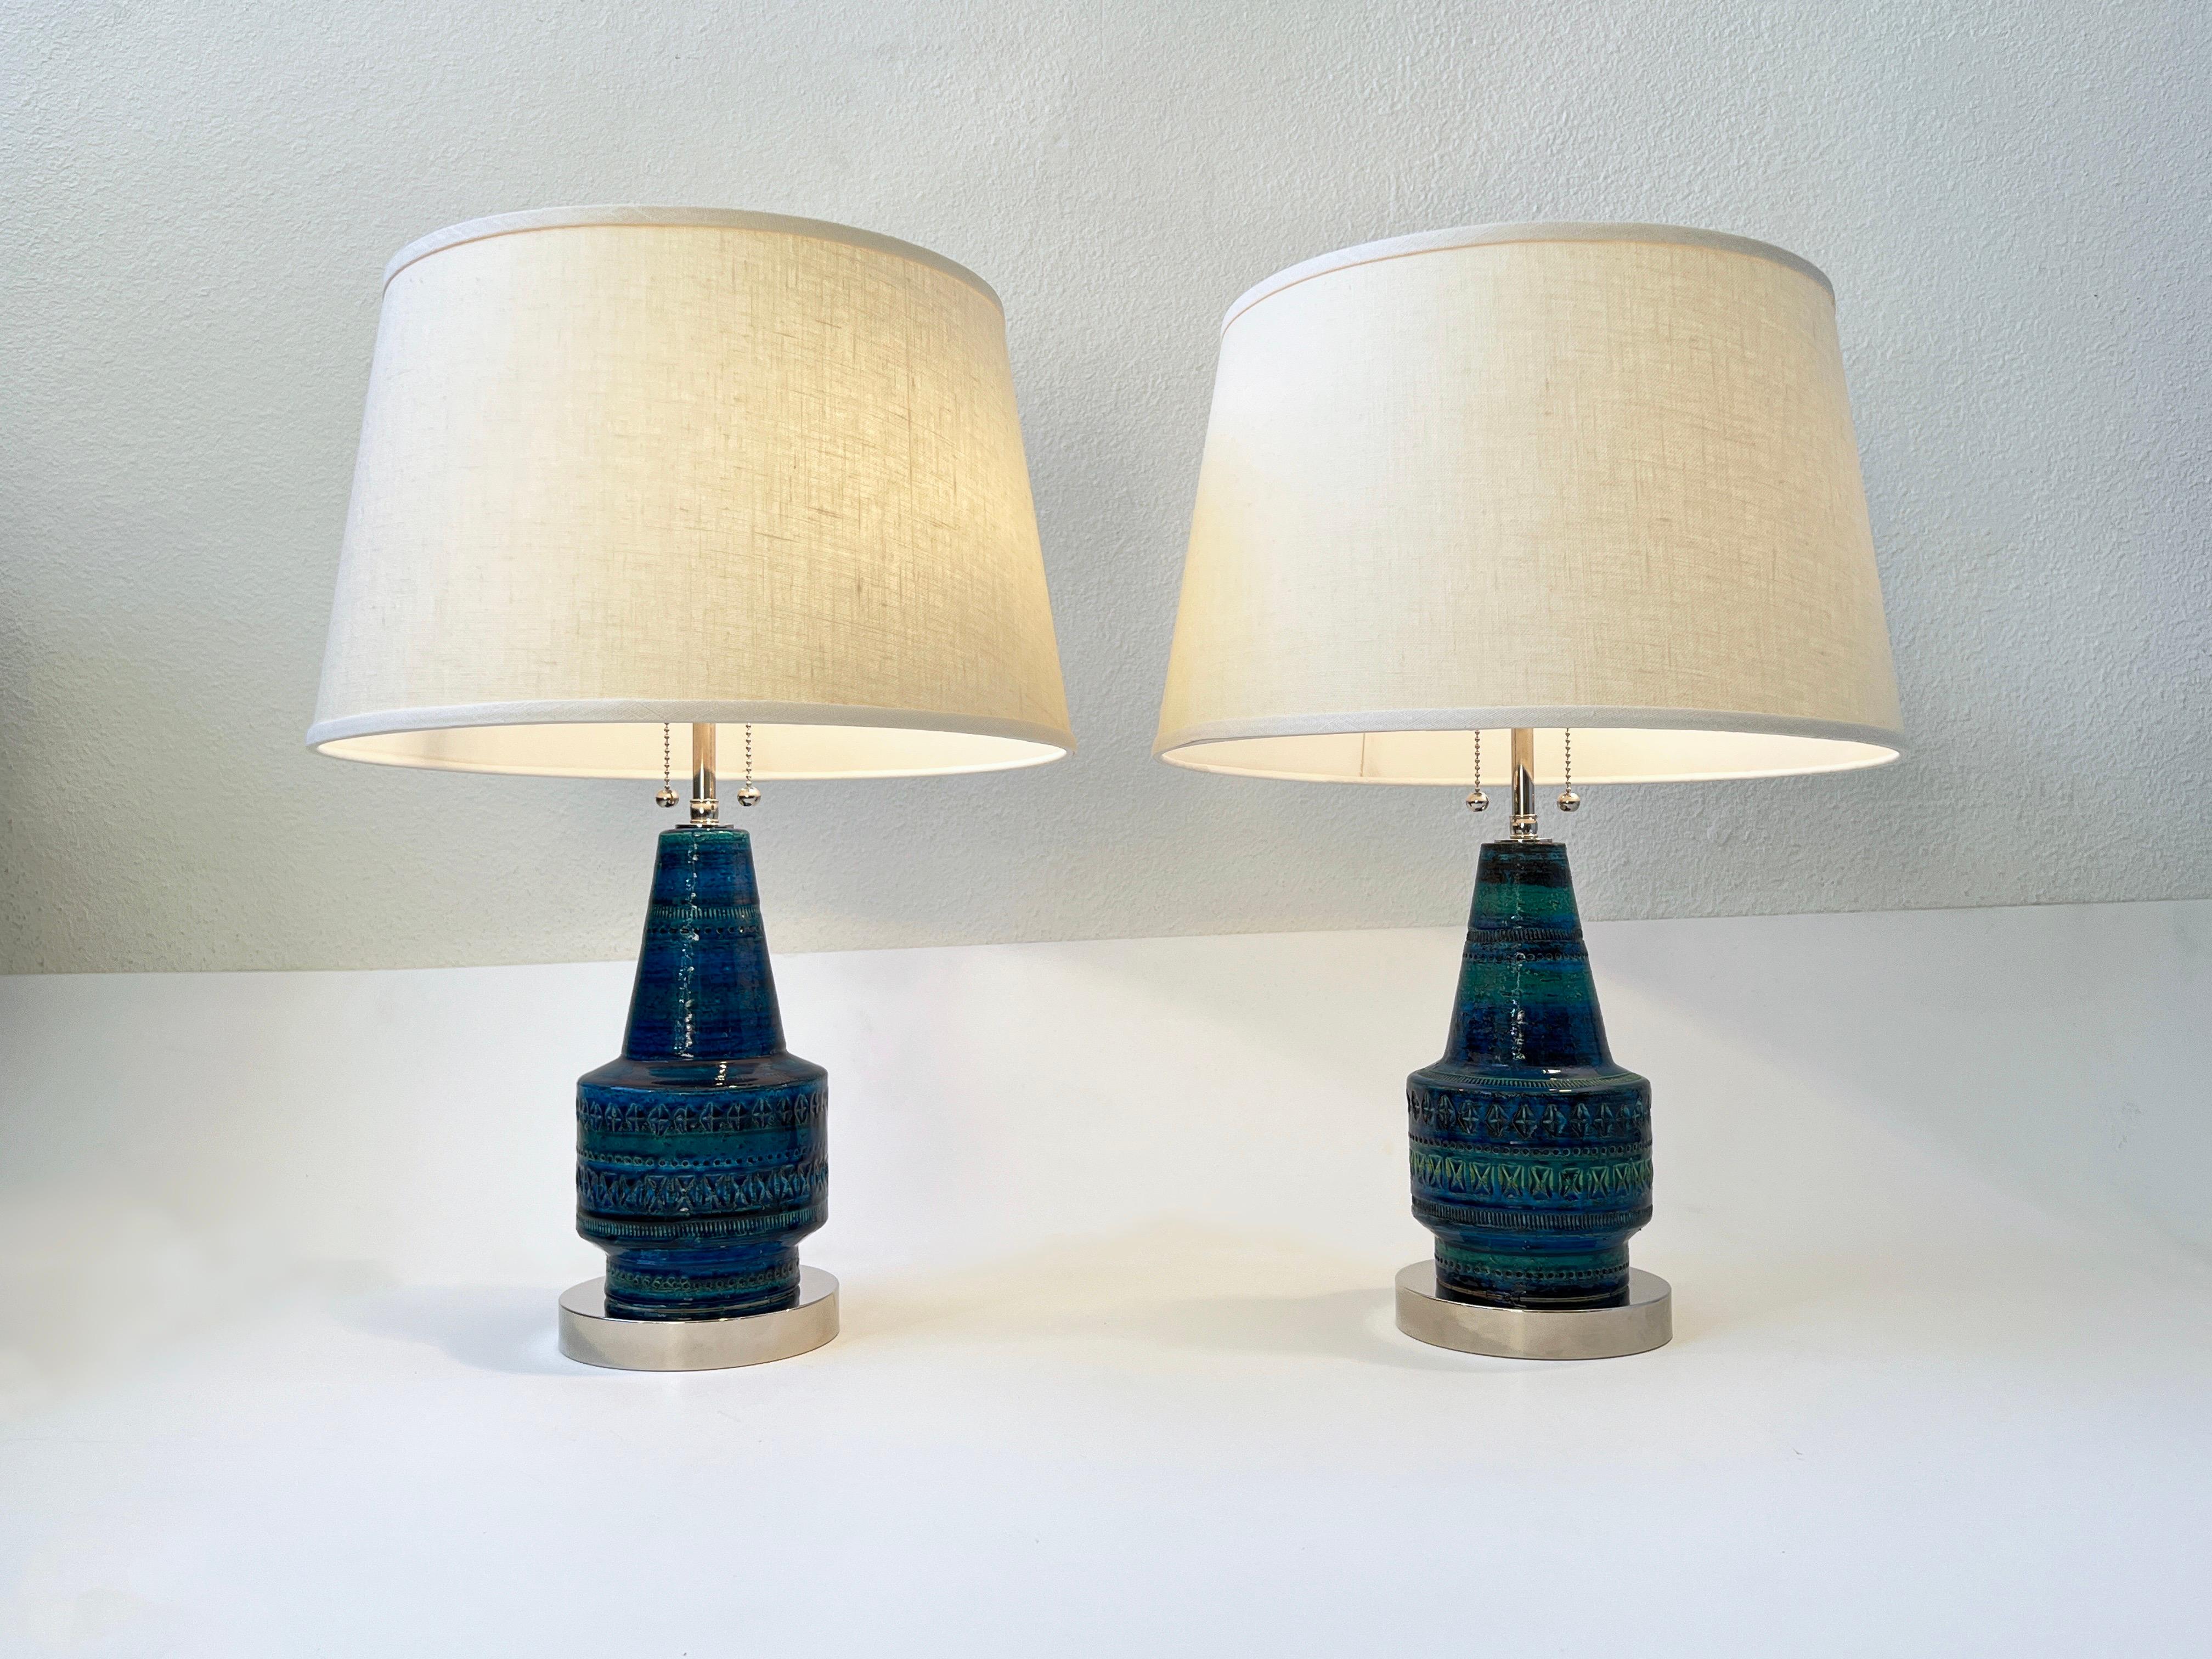 Pair of Italian ‘Rimini Blue’ ceramic lamps designed in the 1960’s by Aldo Londi for Bitossi.
Newly rewired with all new chrome hardware and new vanilla linen shades.
Each lamp takes two small 75w max Edison lightbulb.
Measurements: 16.25” Diameter,